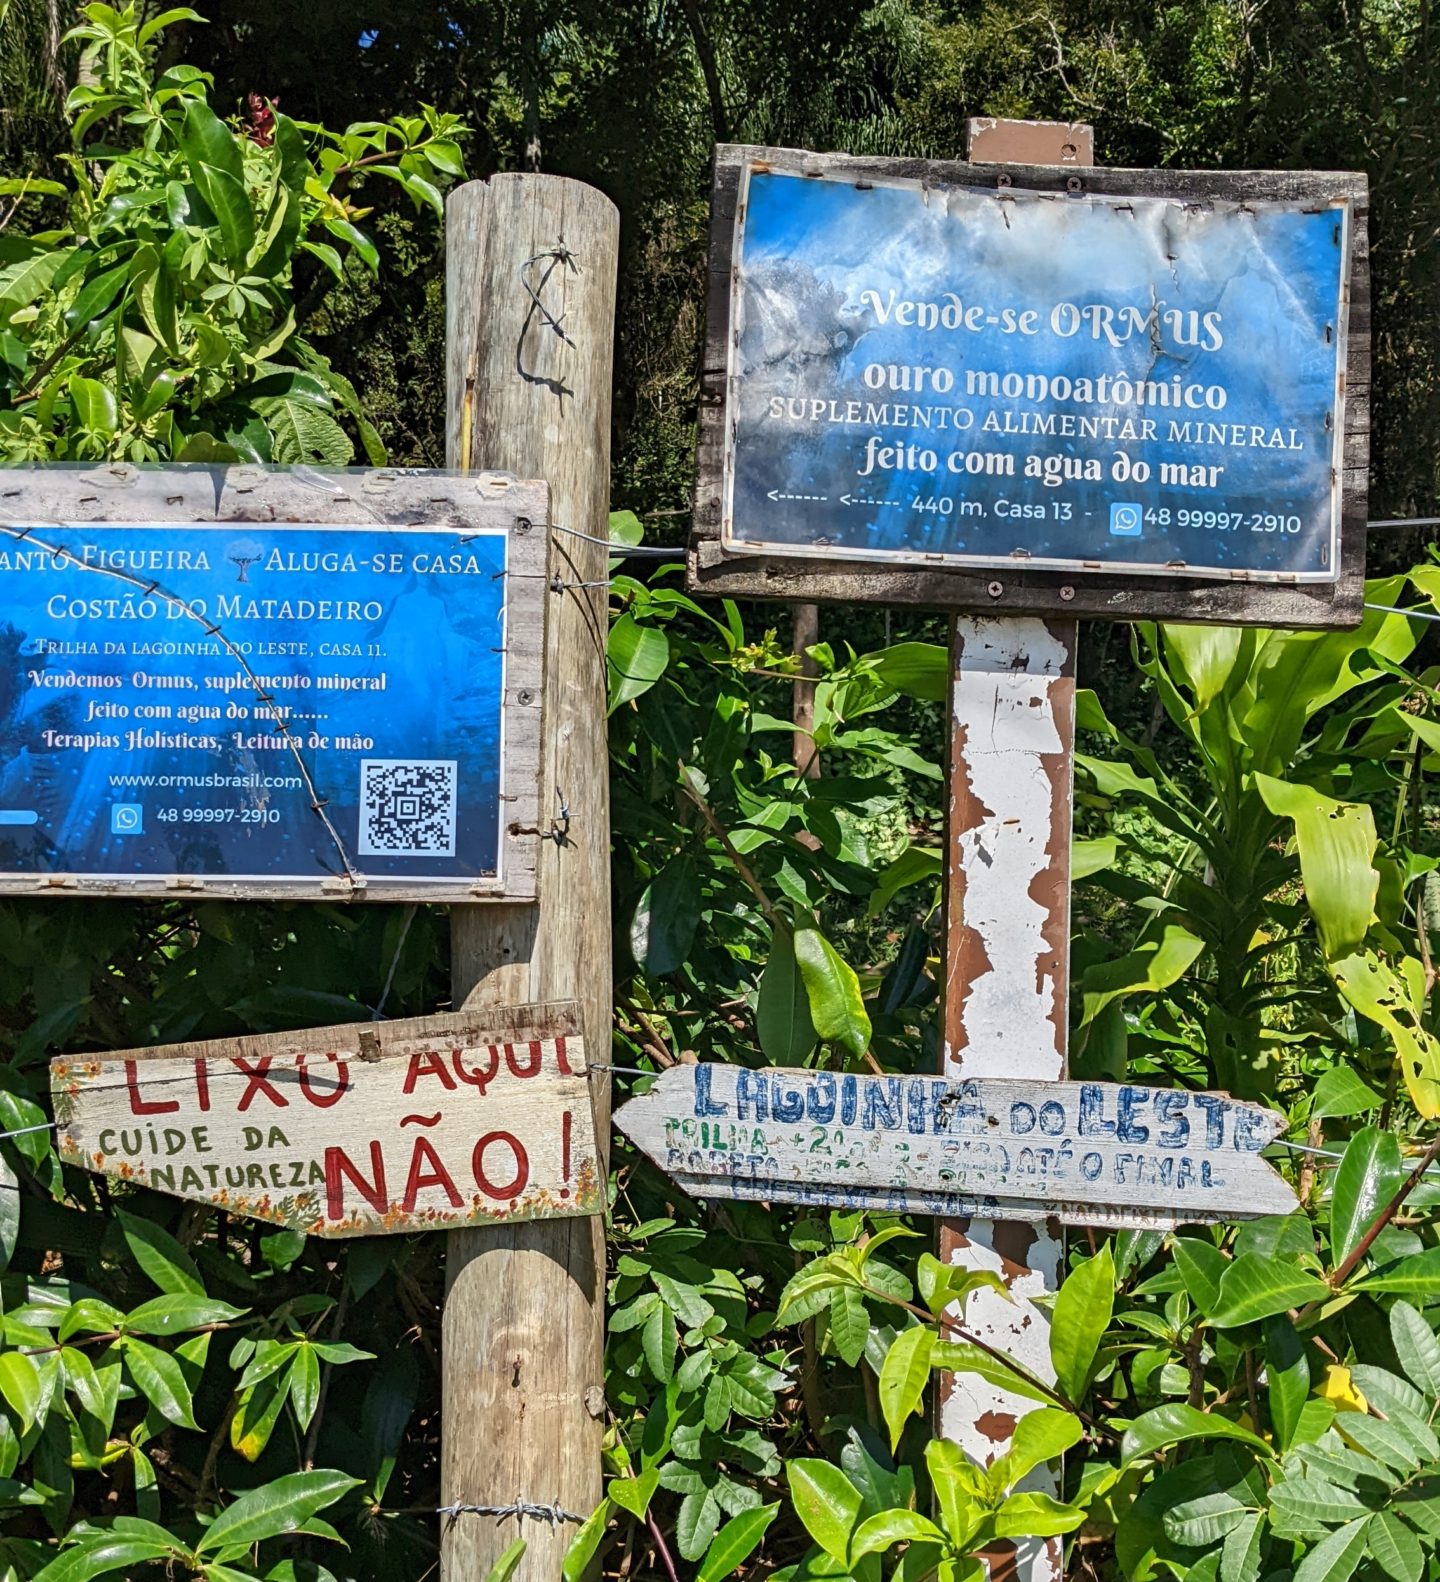 The sign post at Lagoinha do Leste